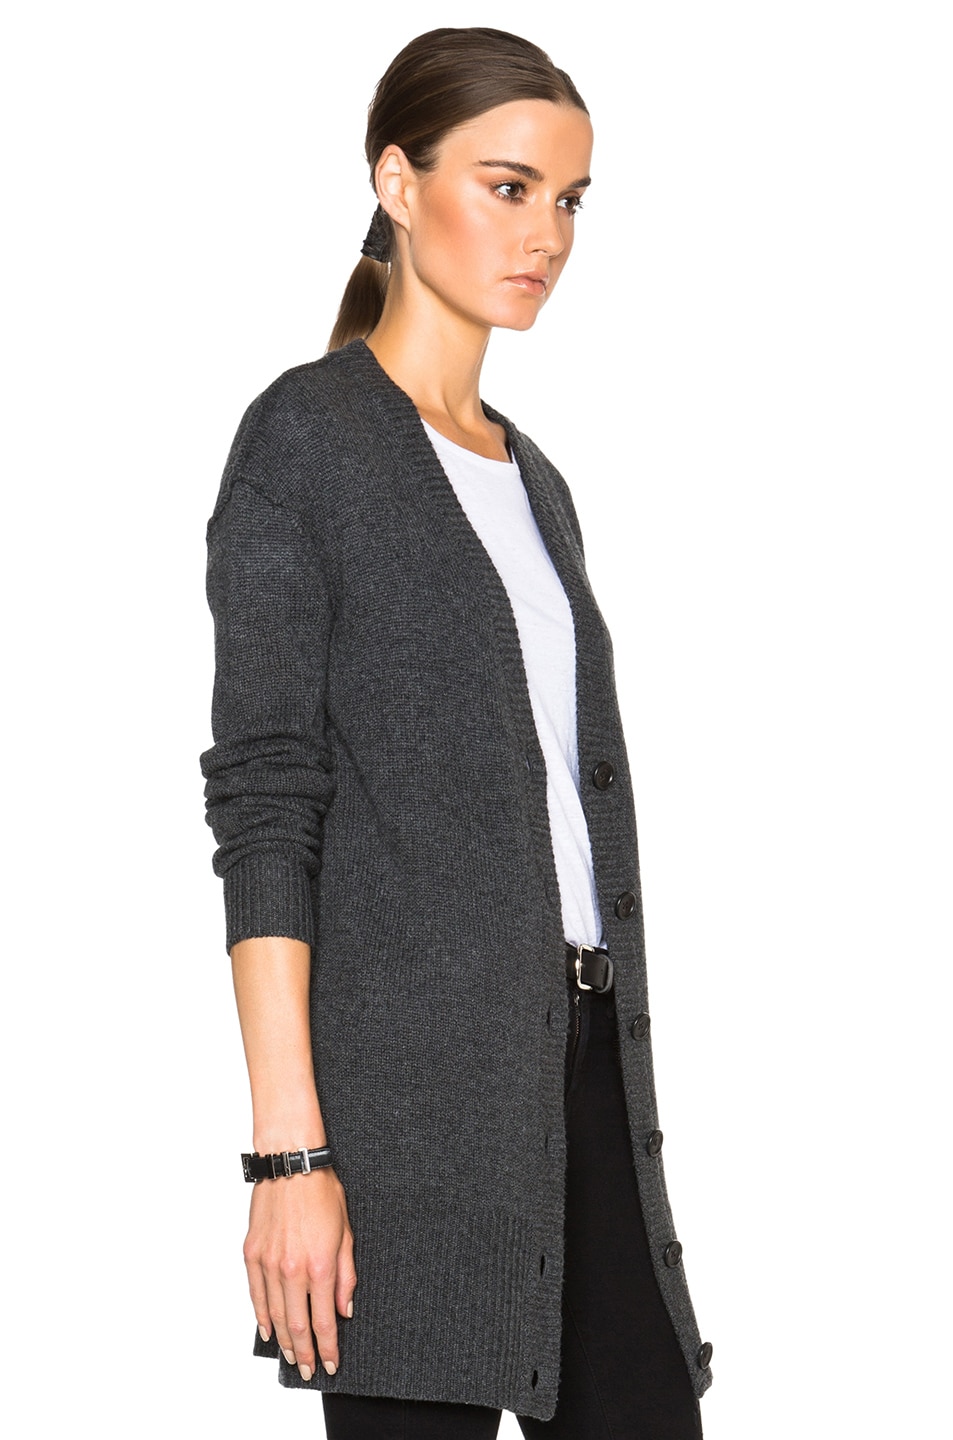 James Perse Cashmere V Neck Cardigan in Charcoal | FWRD